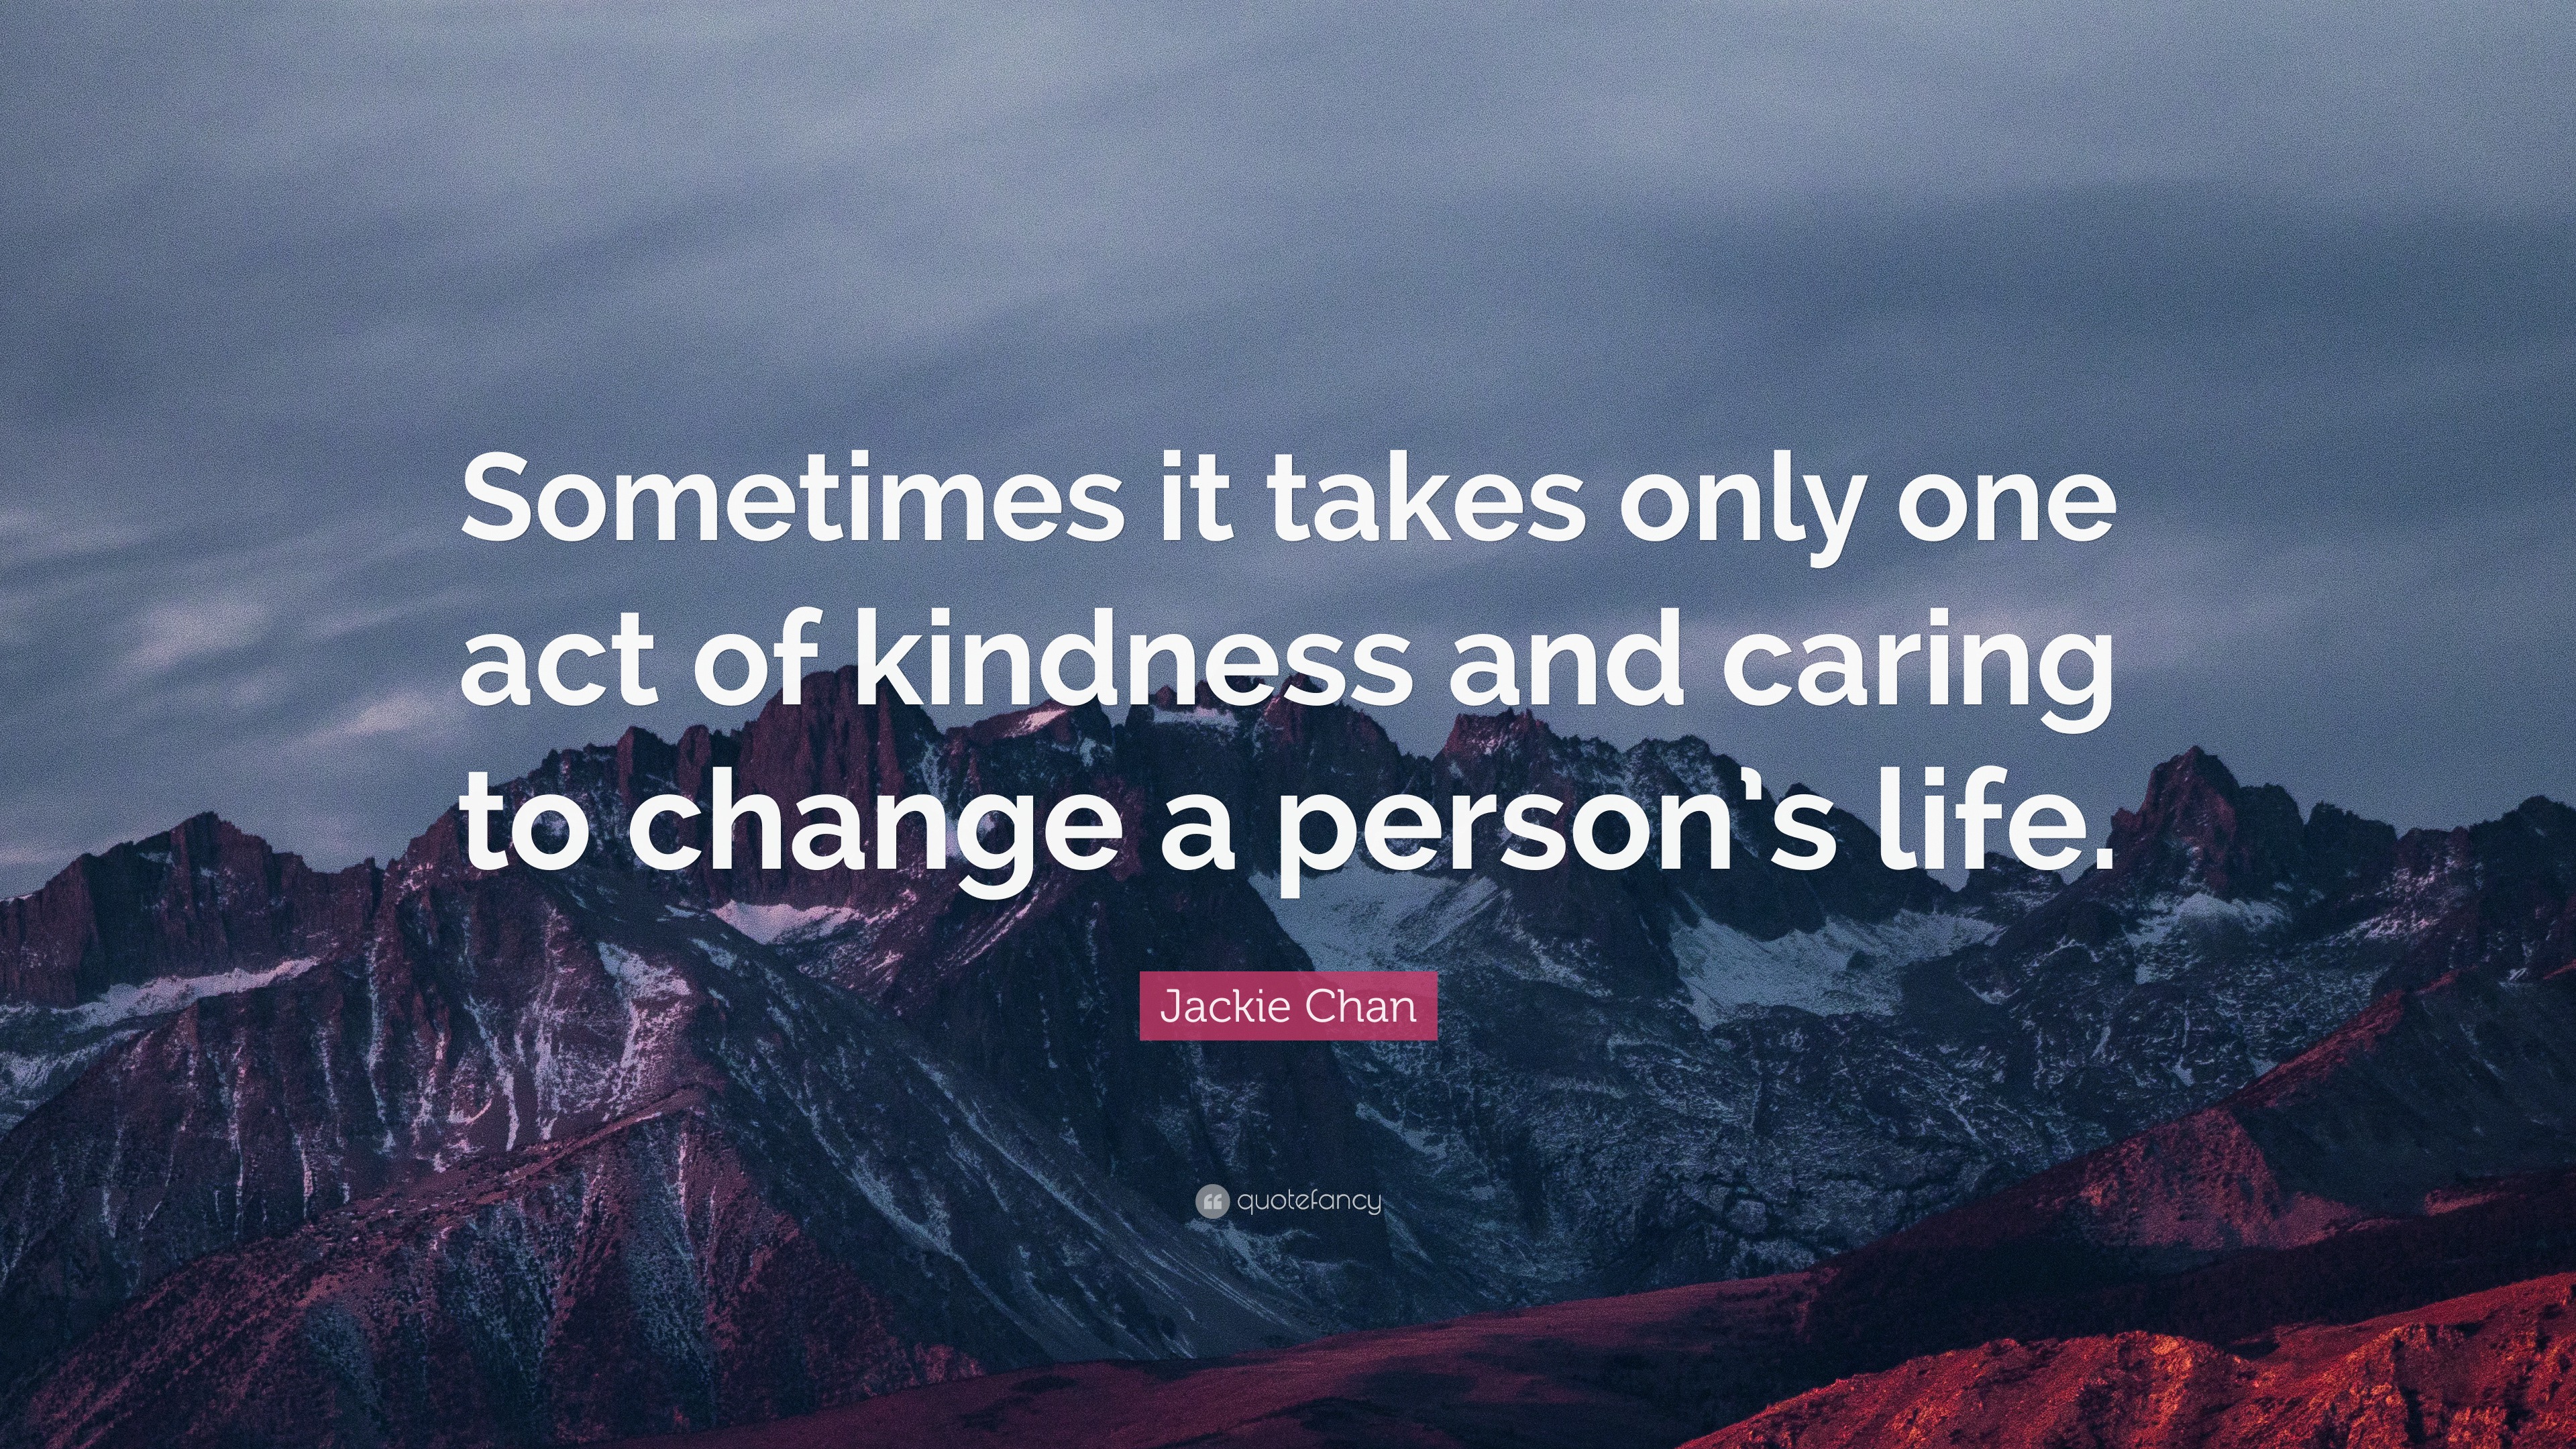 Jackie Chan Quote: “Sometimes it takes only one act of kindness and ...